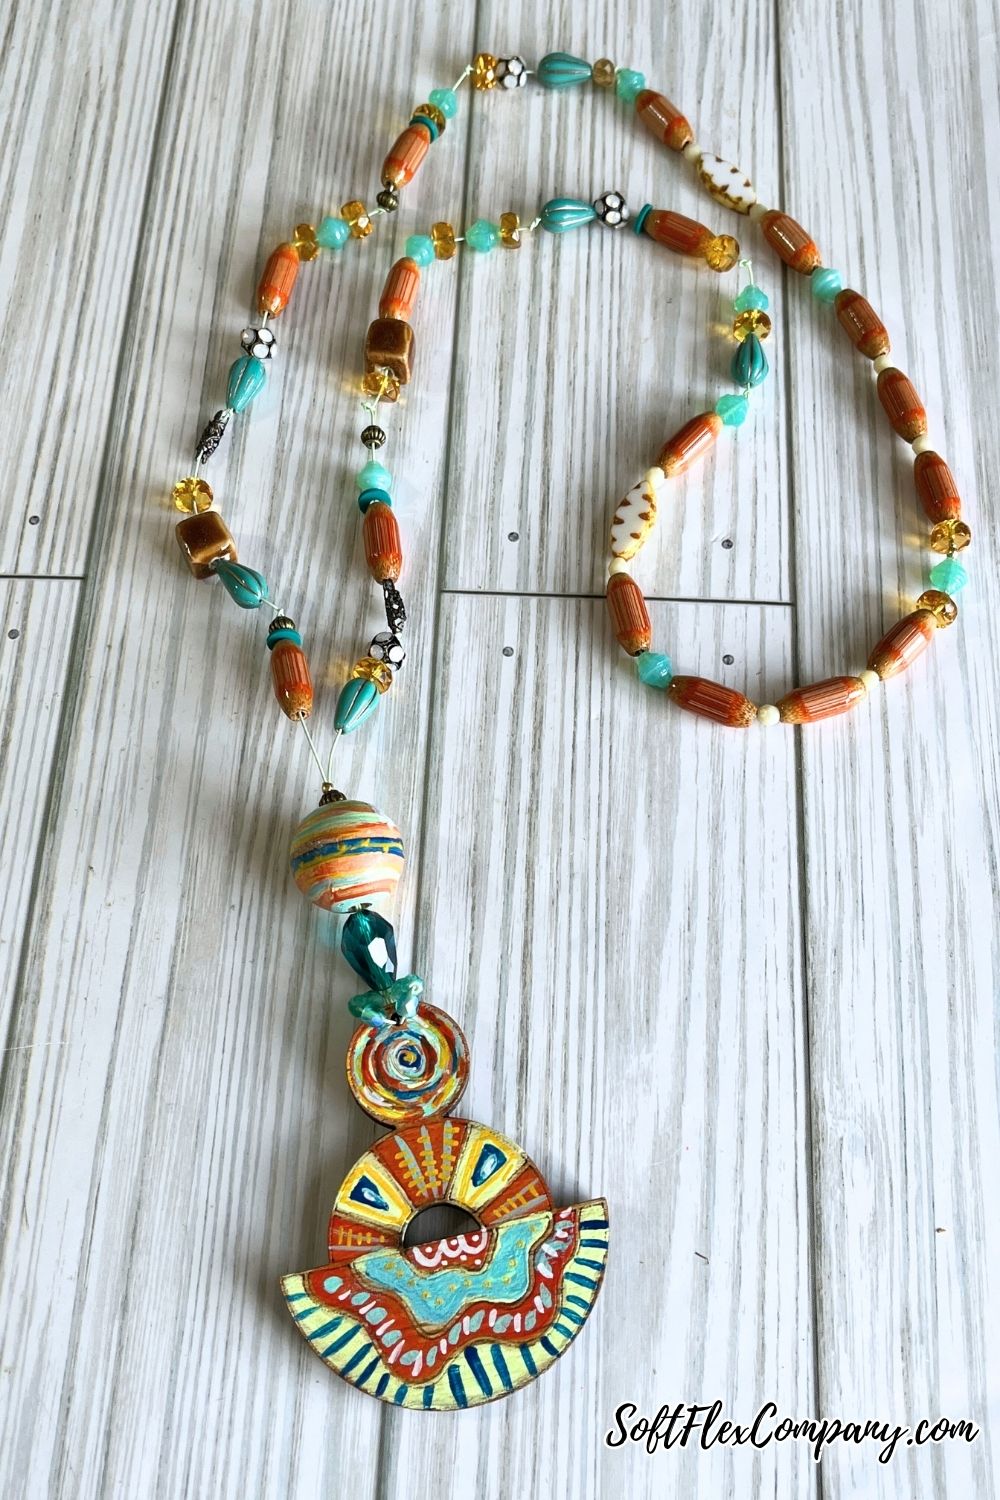 Kitschy Painted Pendant Necklace by Kristen Fagan